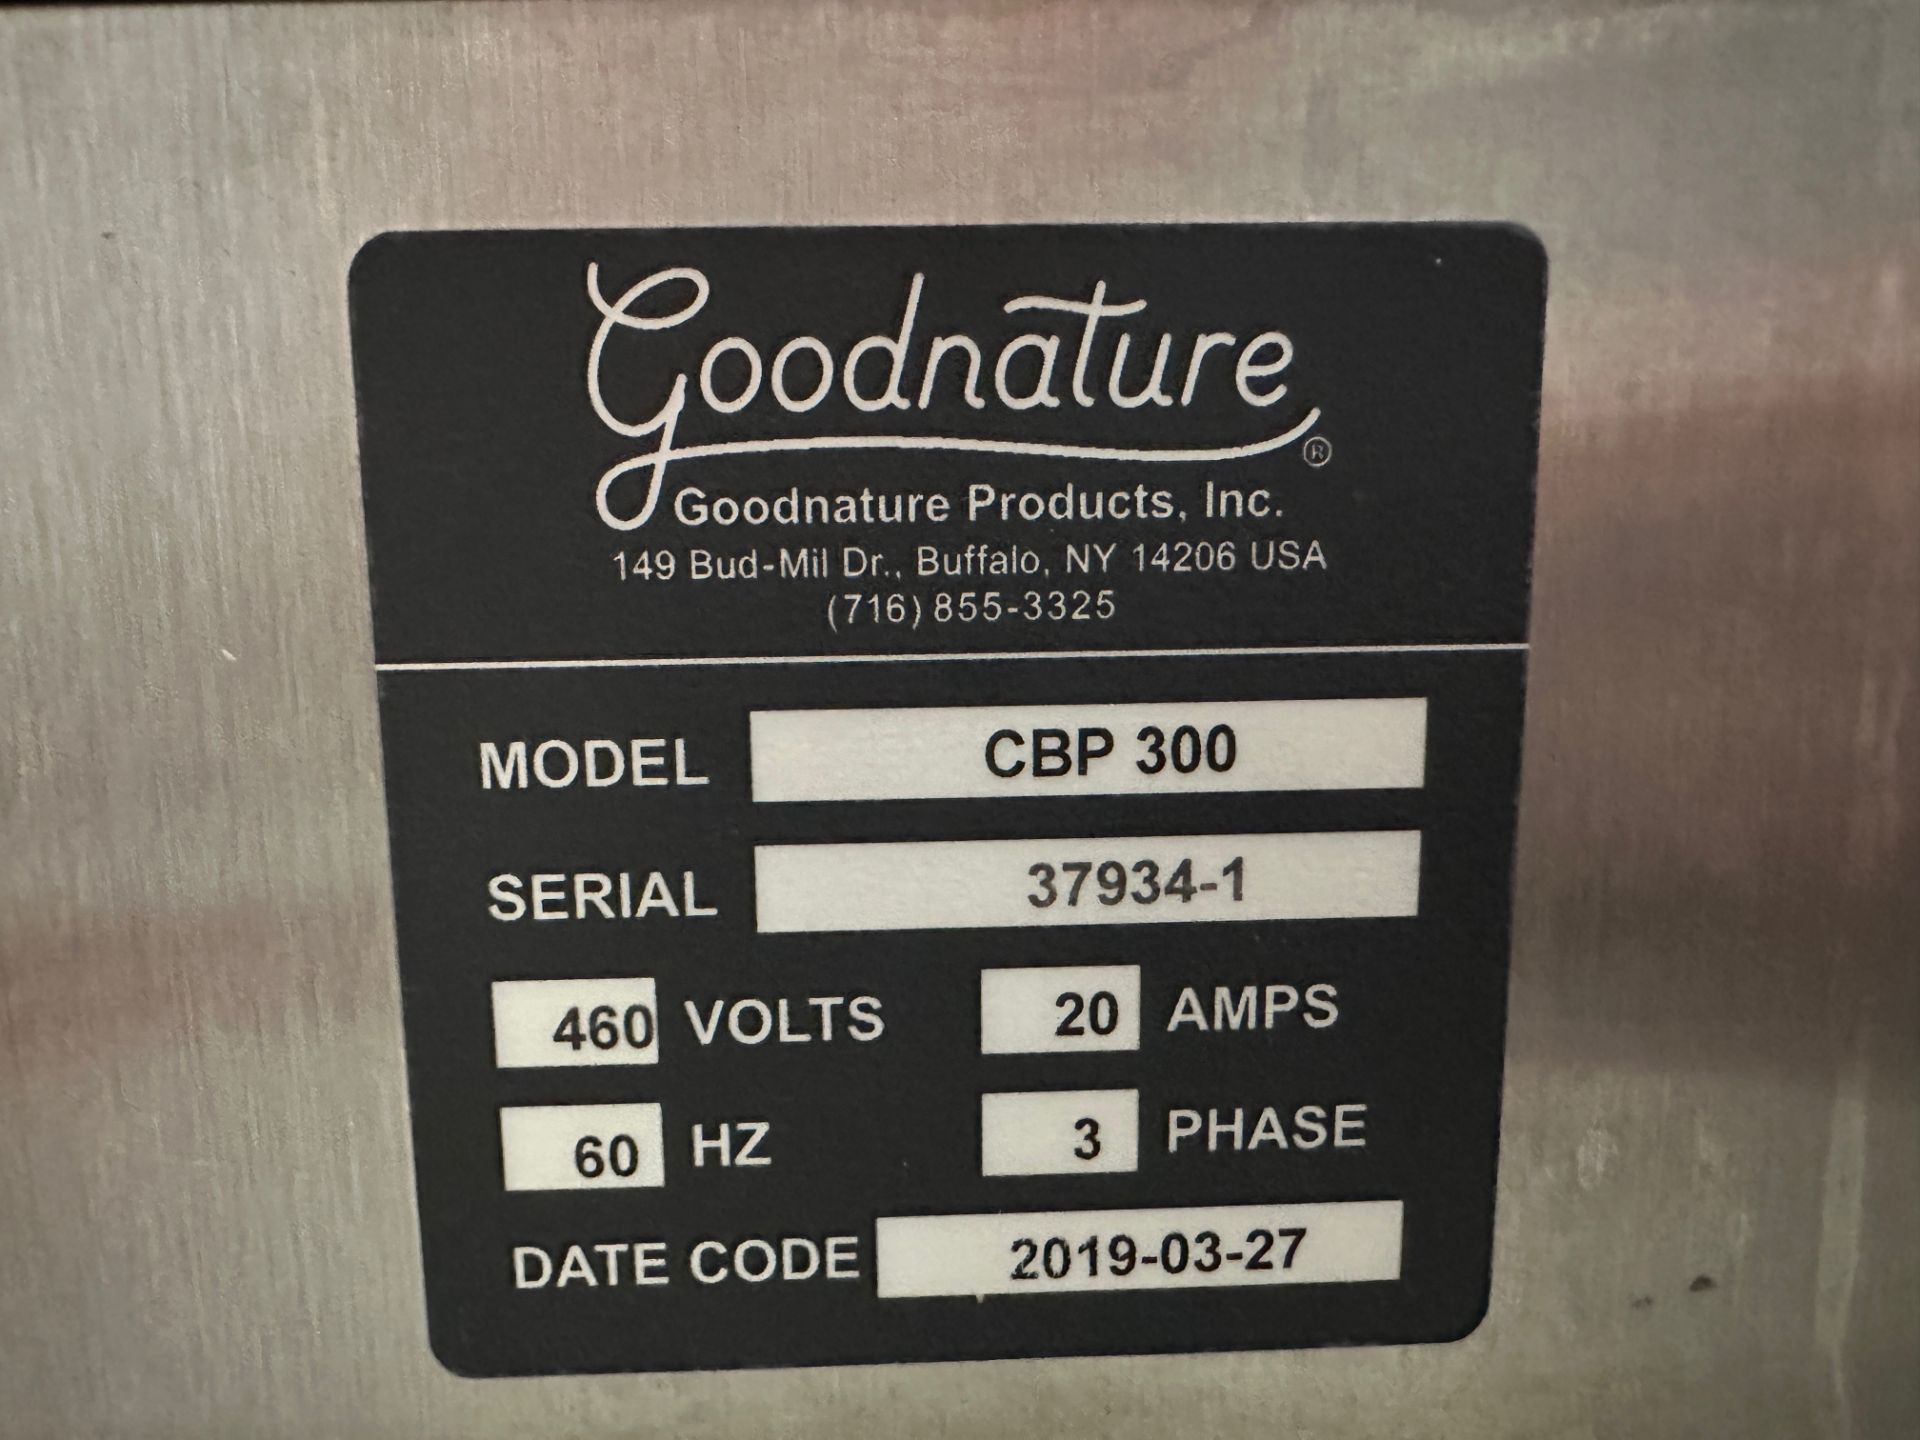 2019 Goodnature CBP 300 Pasteurizer Skid with Alfa Laval Heat Exchanger, Stainless | Rig Fee $350 - Image 4 of 5